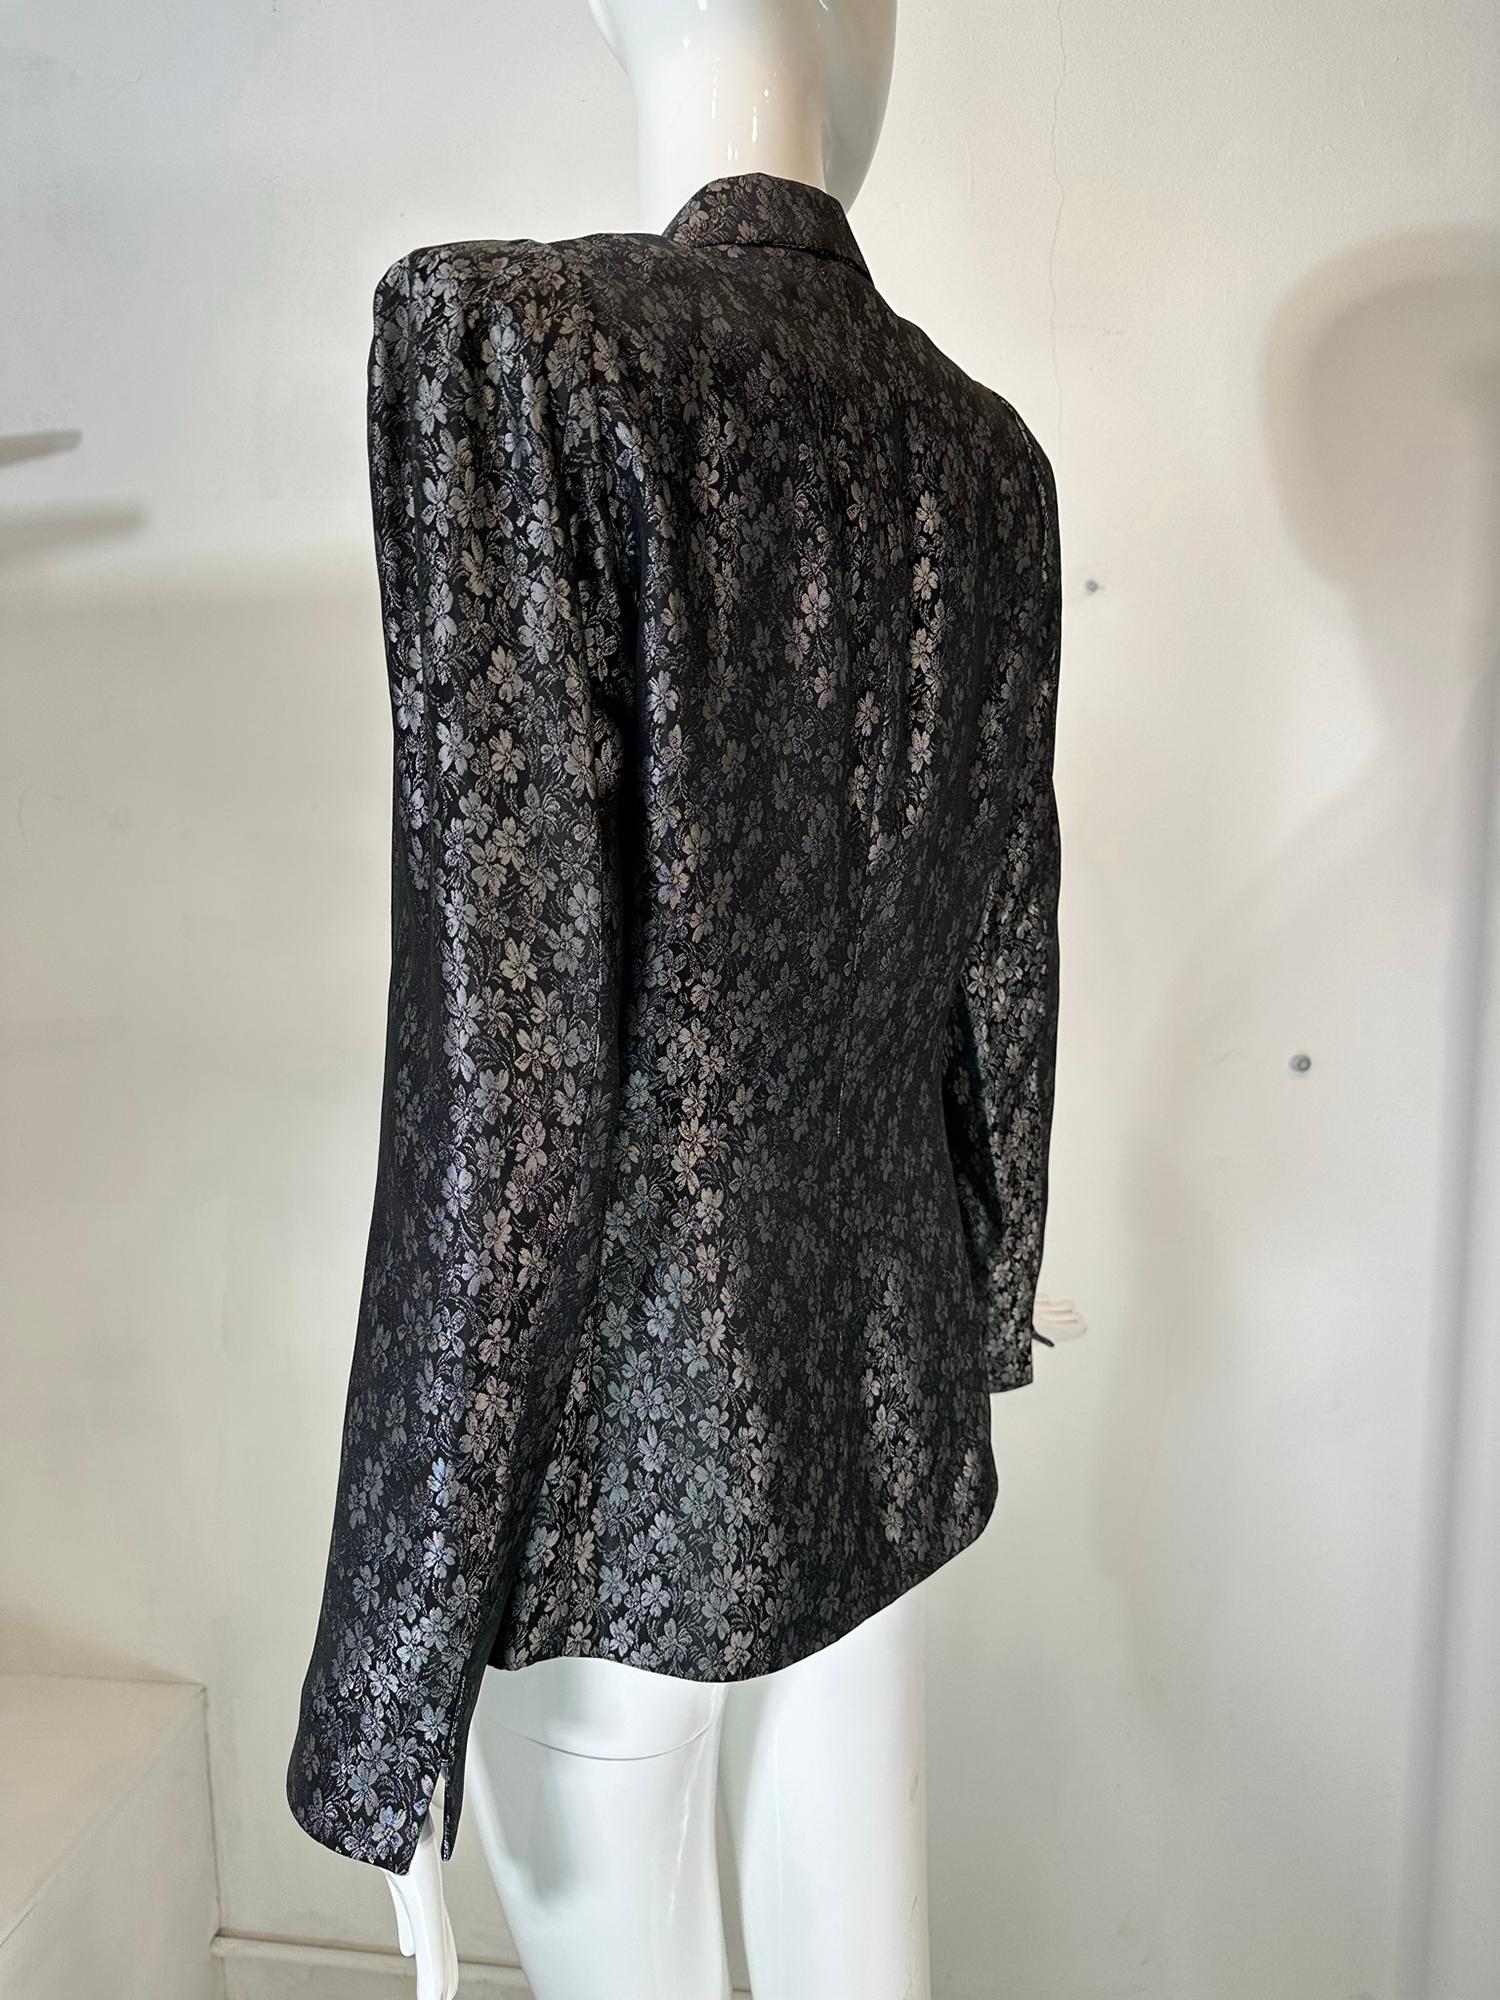 Richard Tyler Black & Silver Brocade Tailored Single Breasted Jacket 1990s For Sale 5